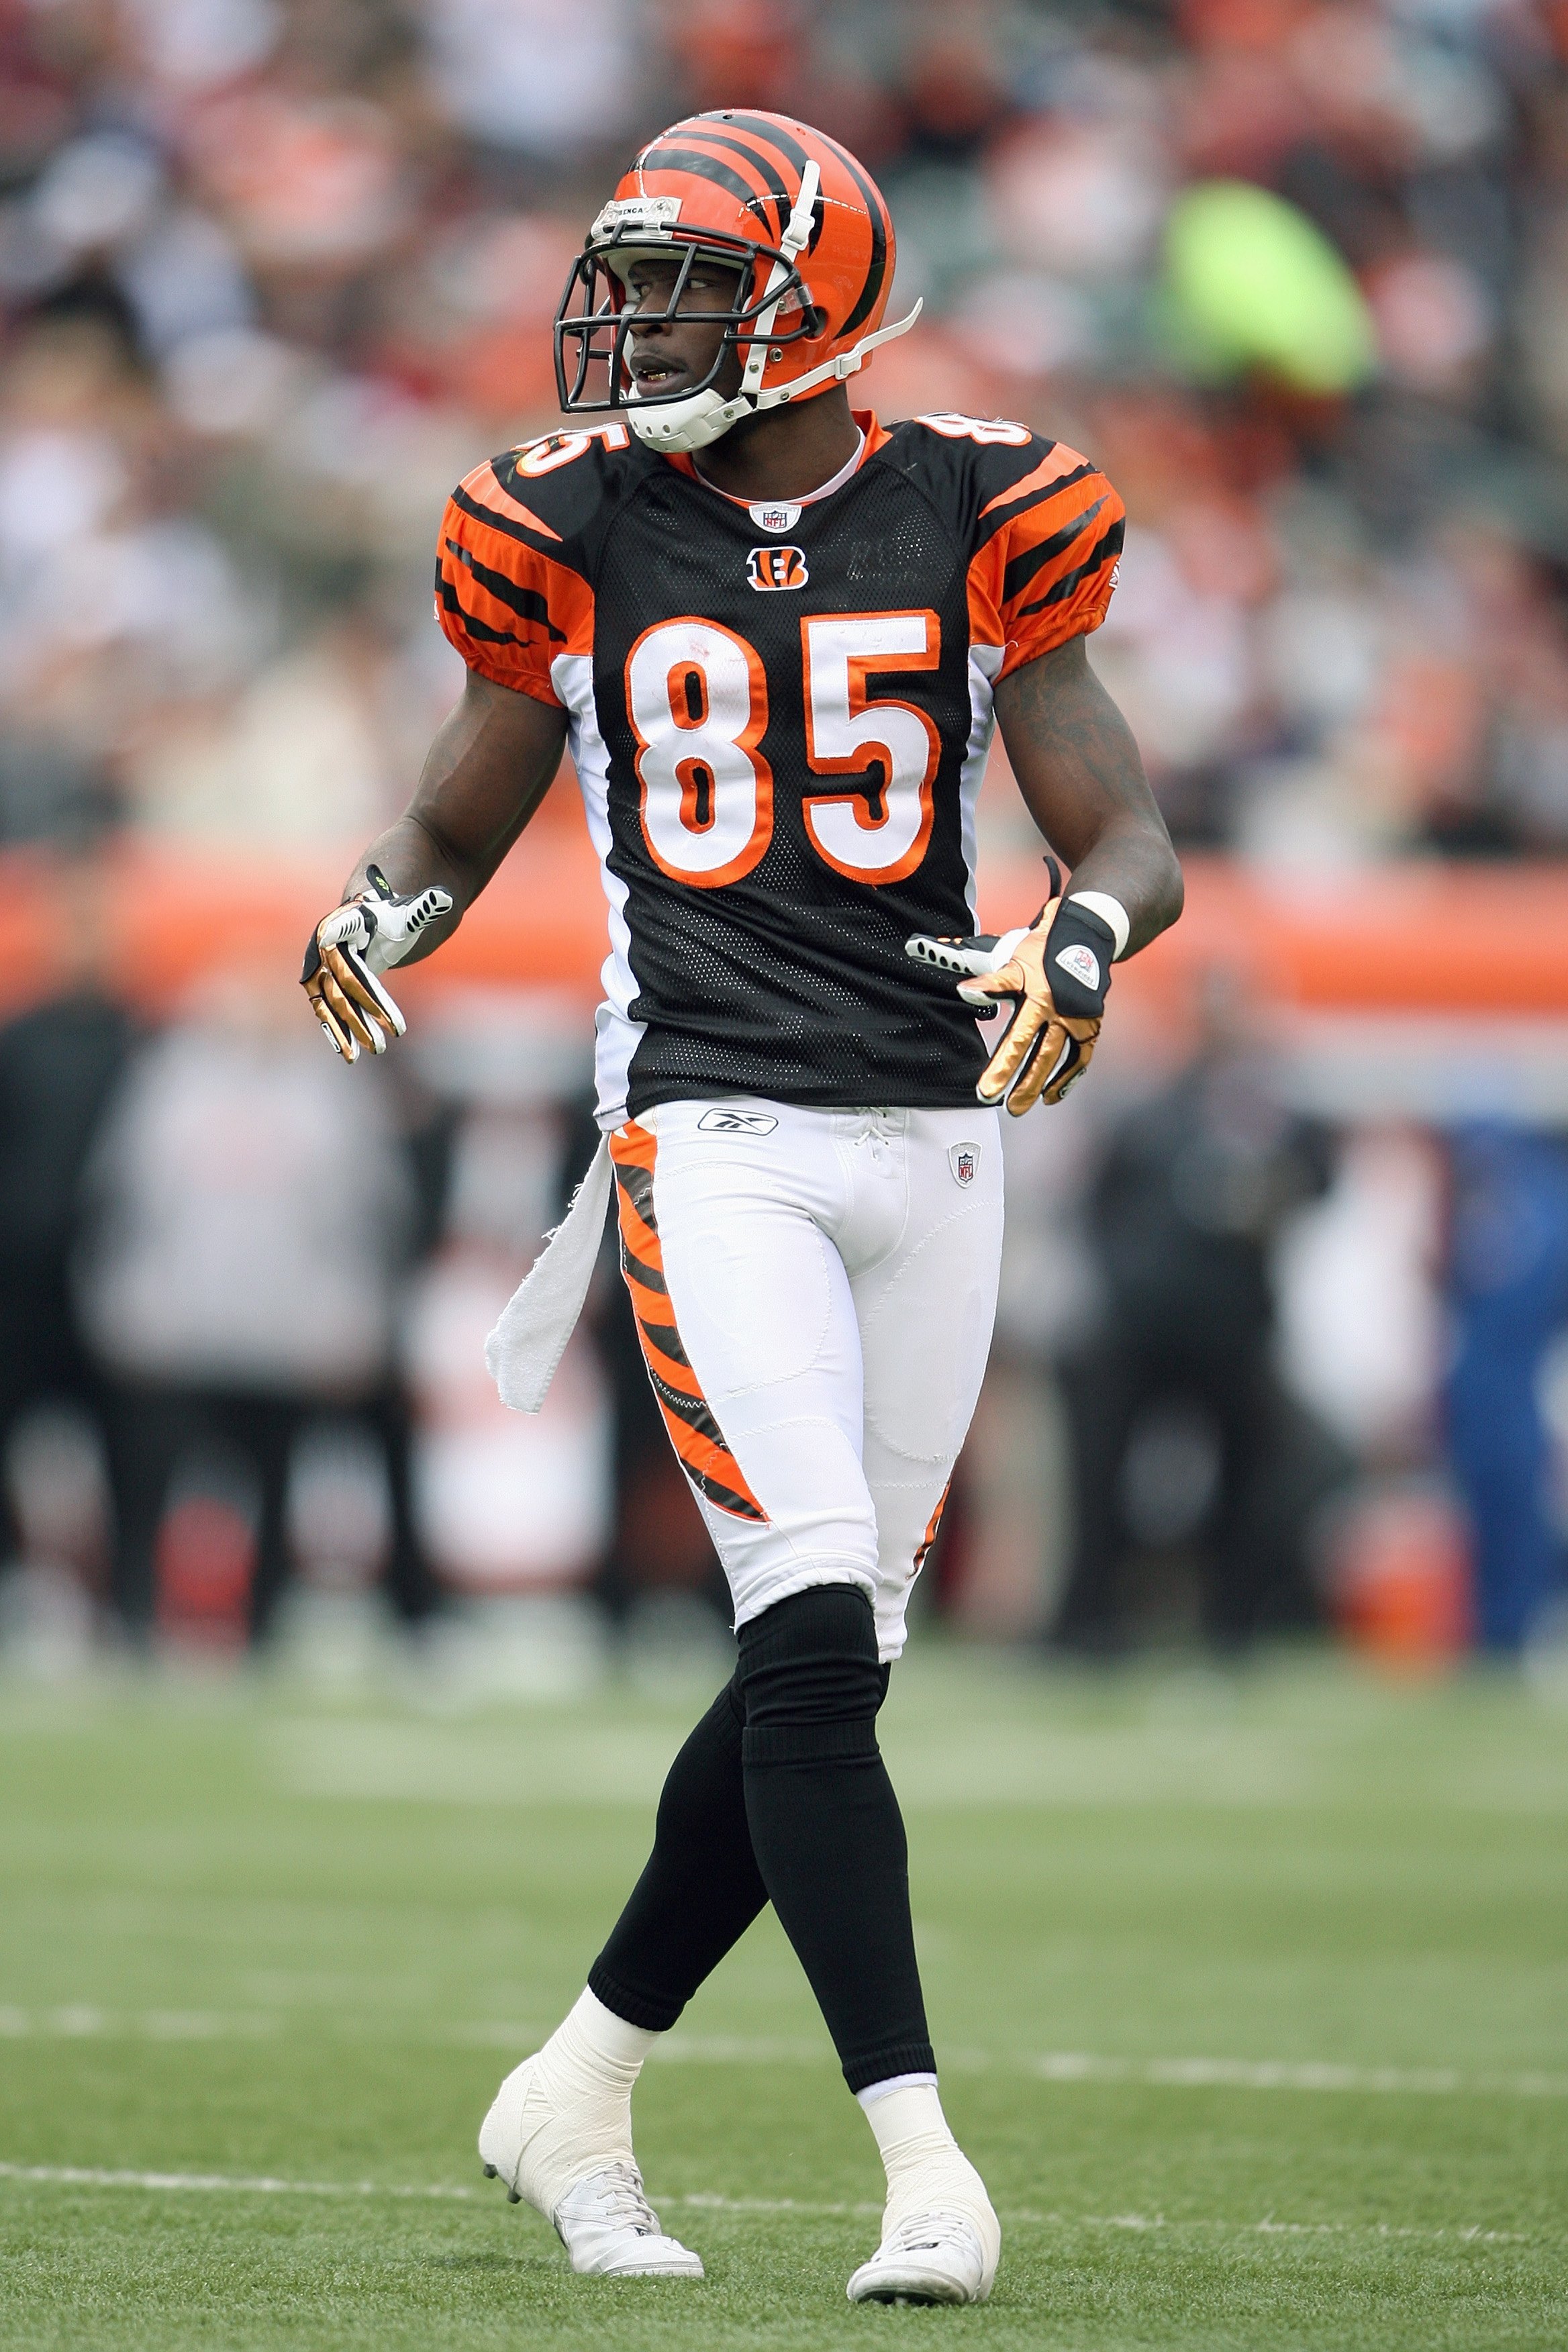 Chad Ochocinco says he'll blend in with Patriots -- and he'll wear No. 85 